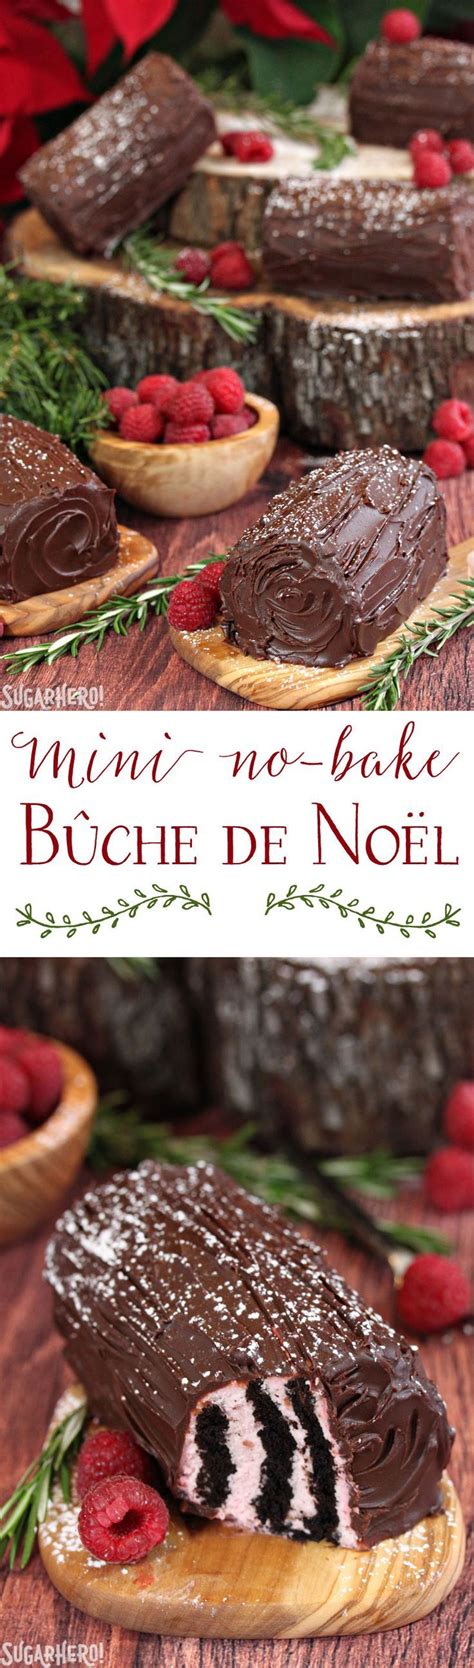 It's a good time to be creative in the kitchen and make something special. Mini No-Bake Buche de Noel - an easy and delicious winter dessert, NO OVEN REQUIRED! | From ...